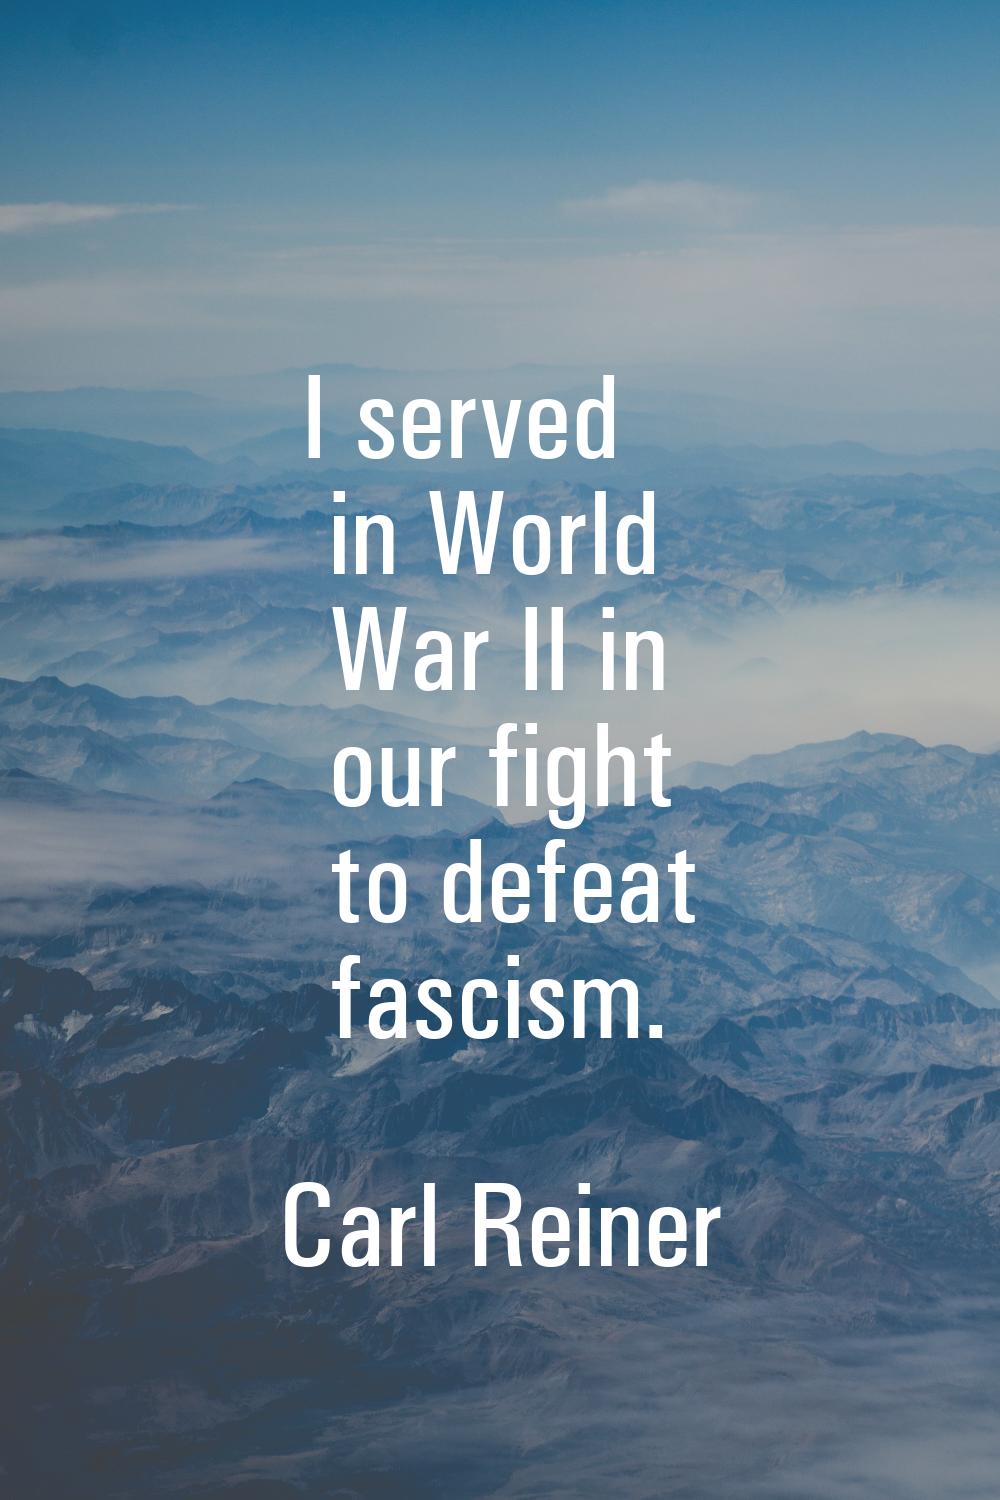 I served in World War II in our fight to defeat fascism.